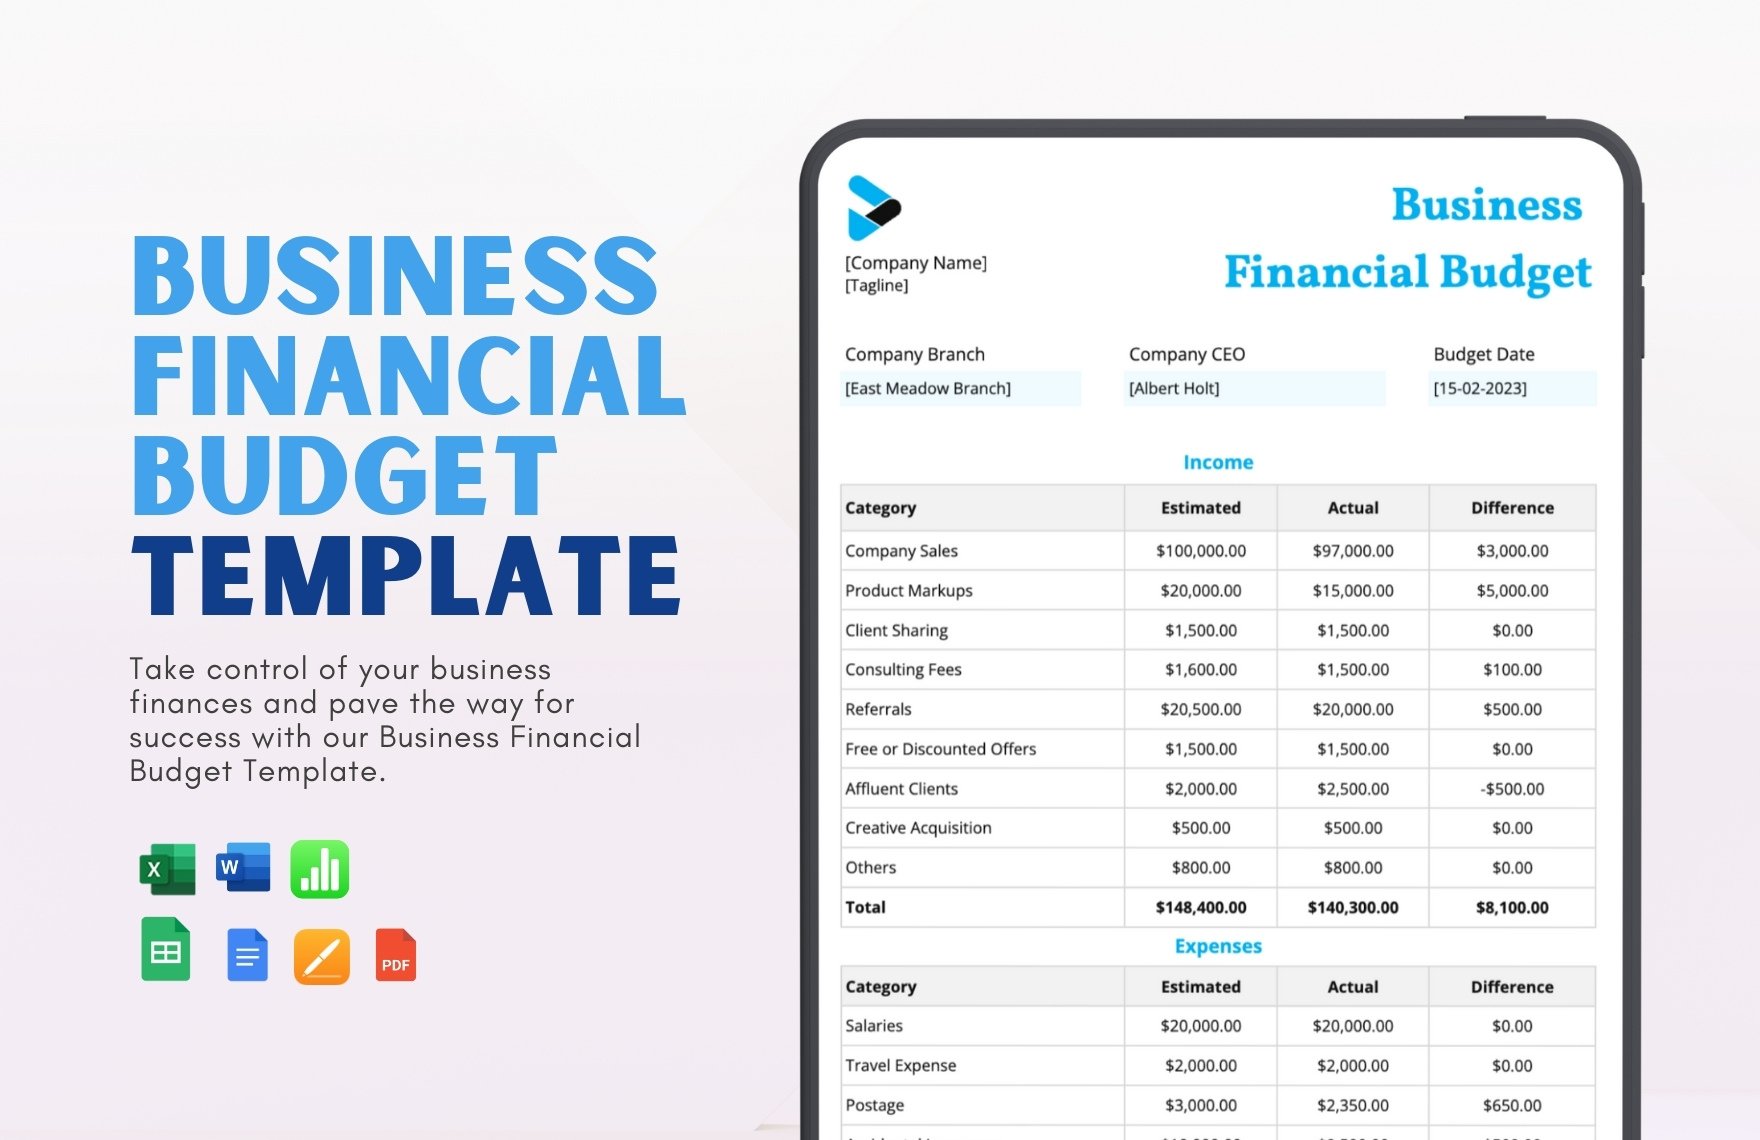 Business Financial Budget Template in Word, Google Docs, Excel, PDF, Google Sheets, Apple Pages, Apple Numbers